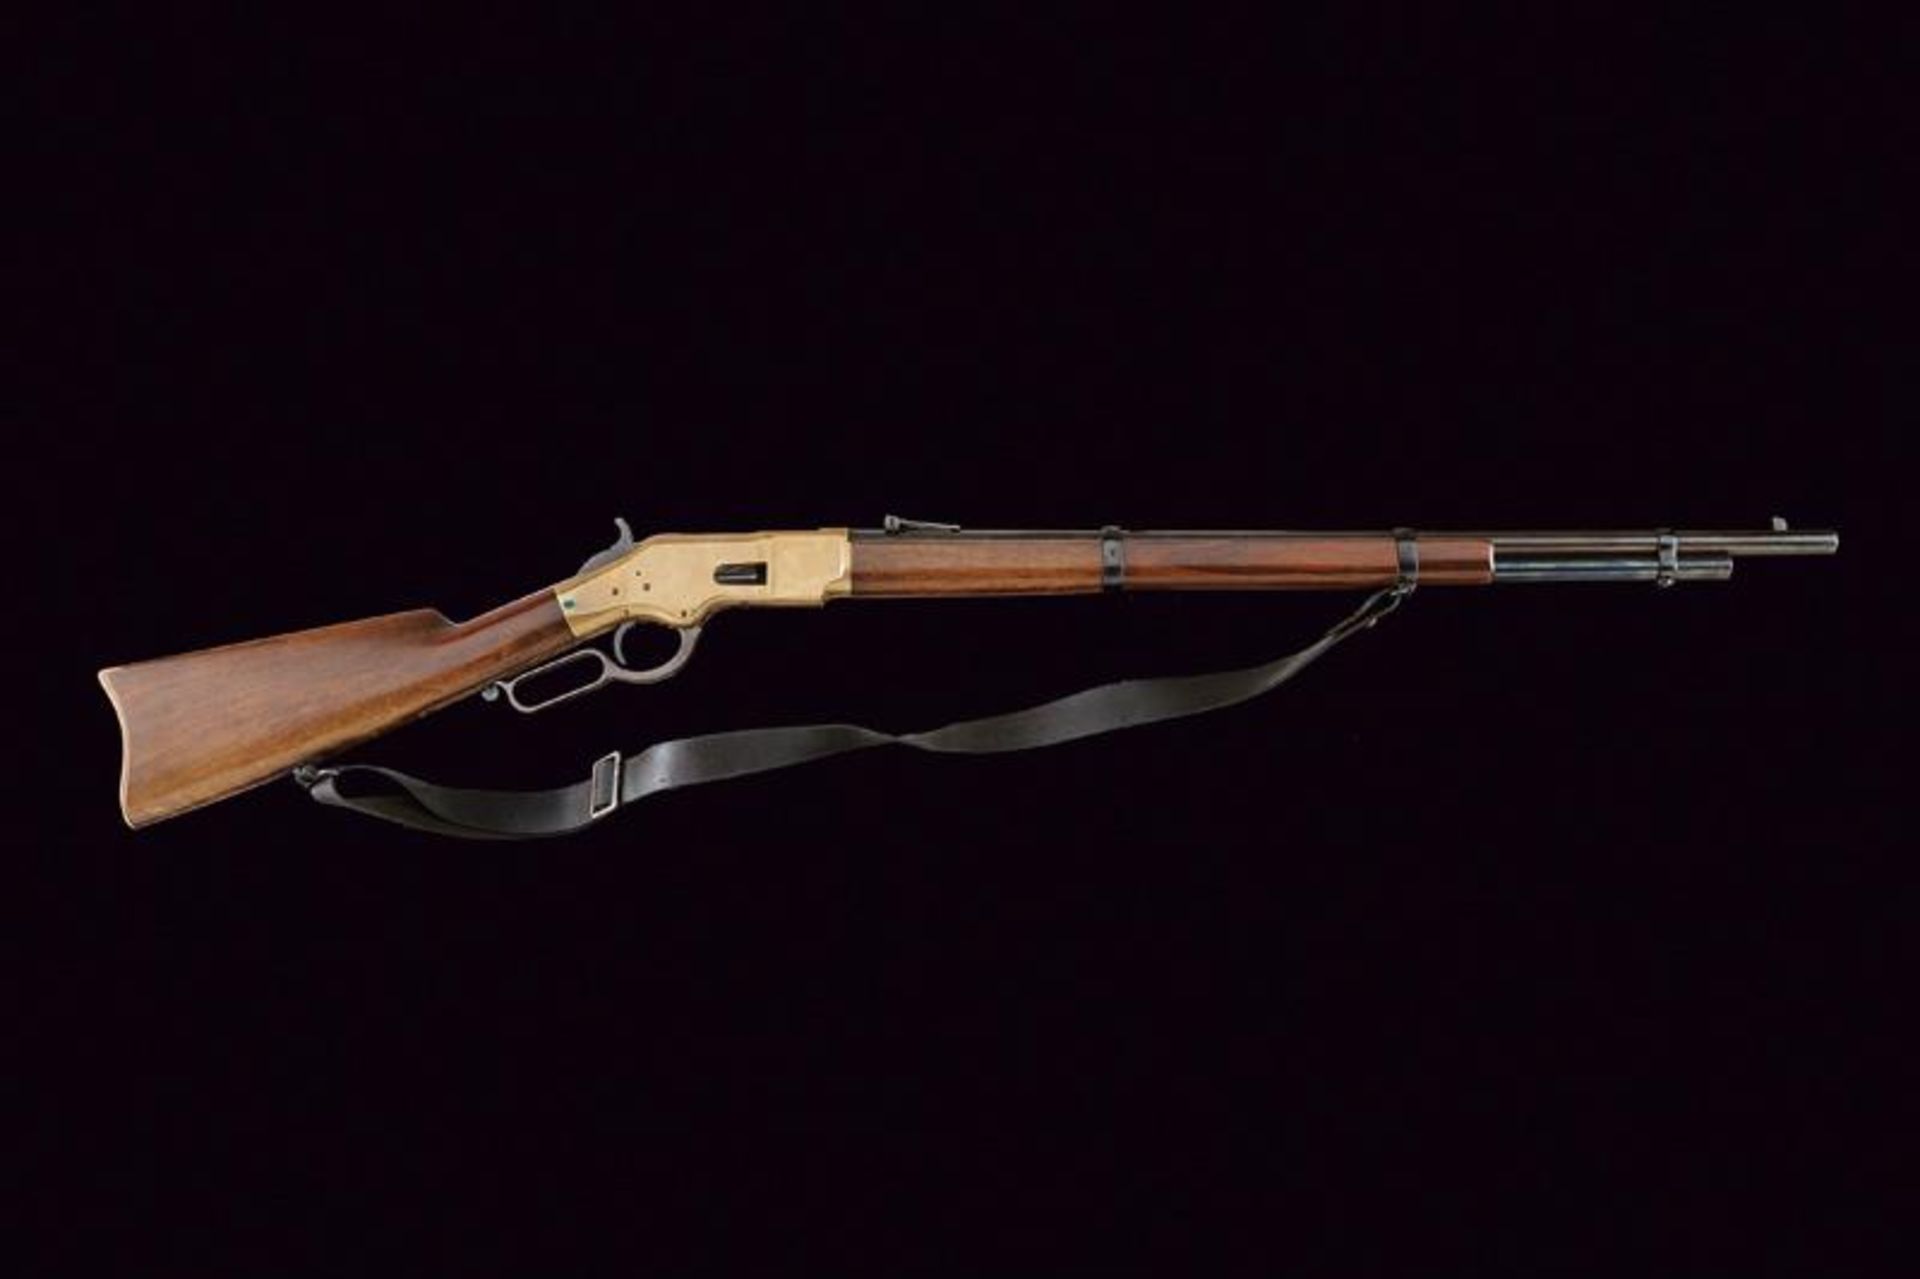 A Winchester Model 1866 Musket - Image 9 of 9